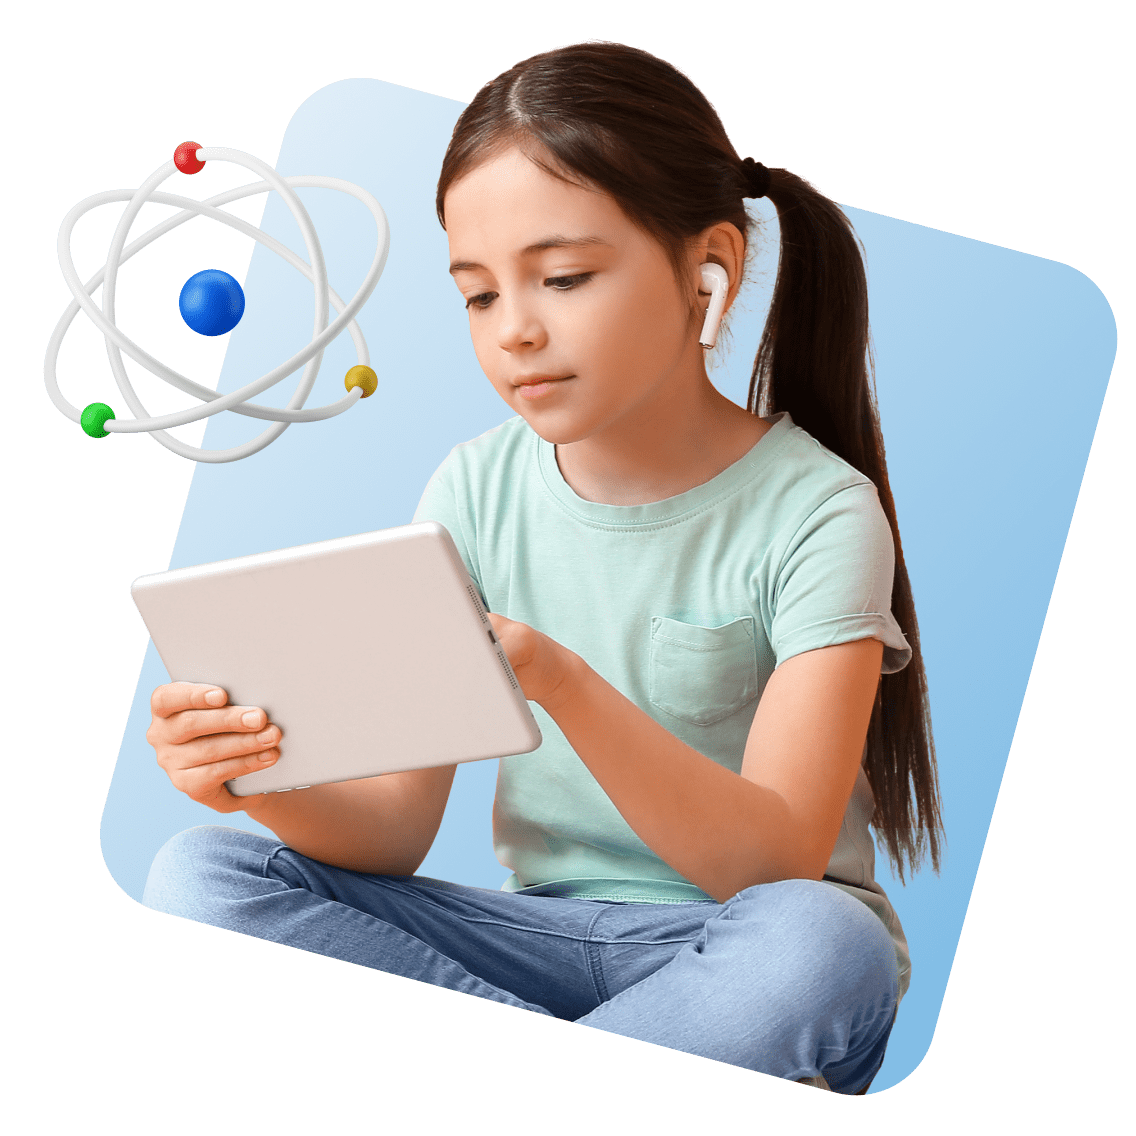 California Online Schools image 1 (name 3 Young Girl Tablet Airpods Science 3)